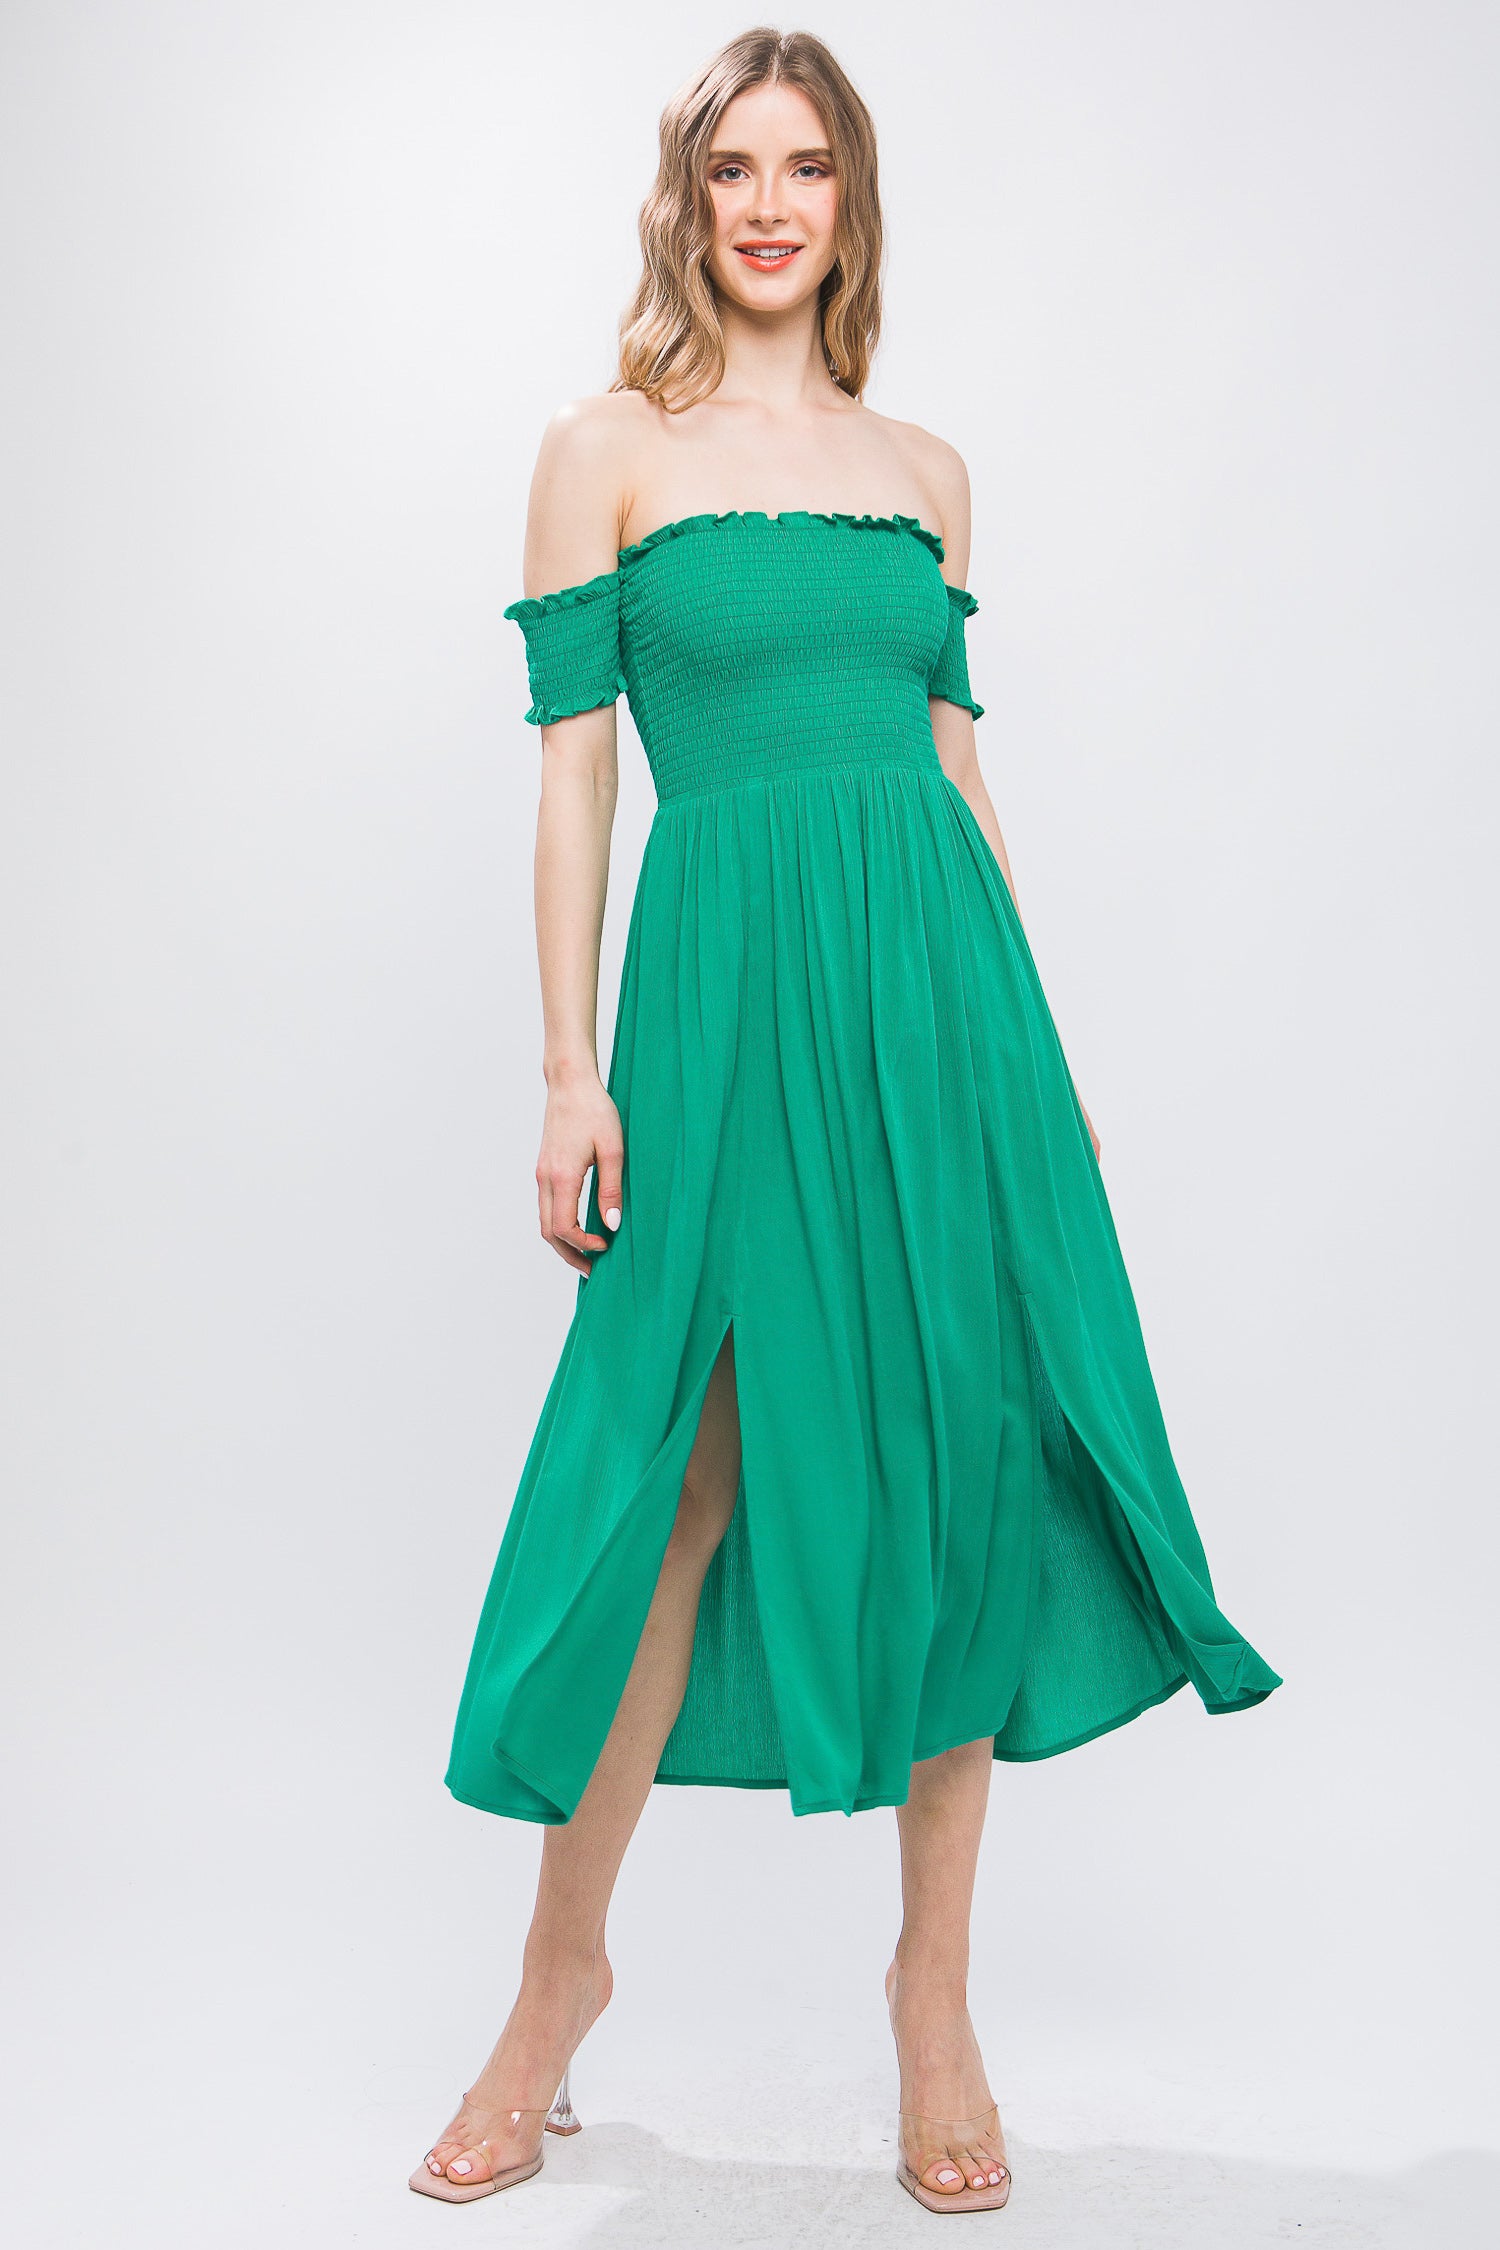 GREEN Flowy Off The Shoulder Dress - 6 colors - Ships from The USA - women's dress at TFC&H Co.